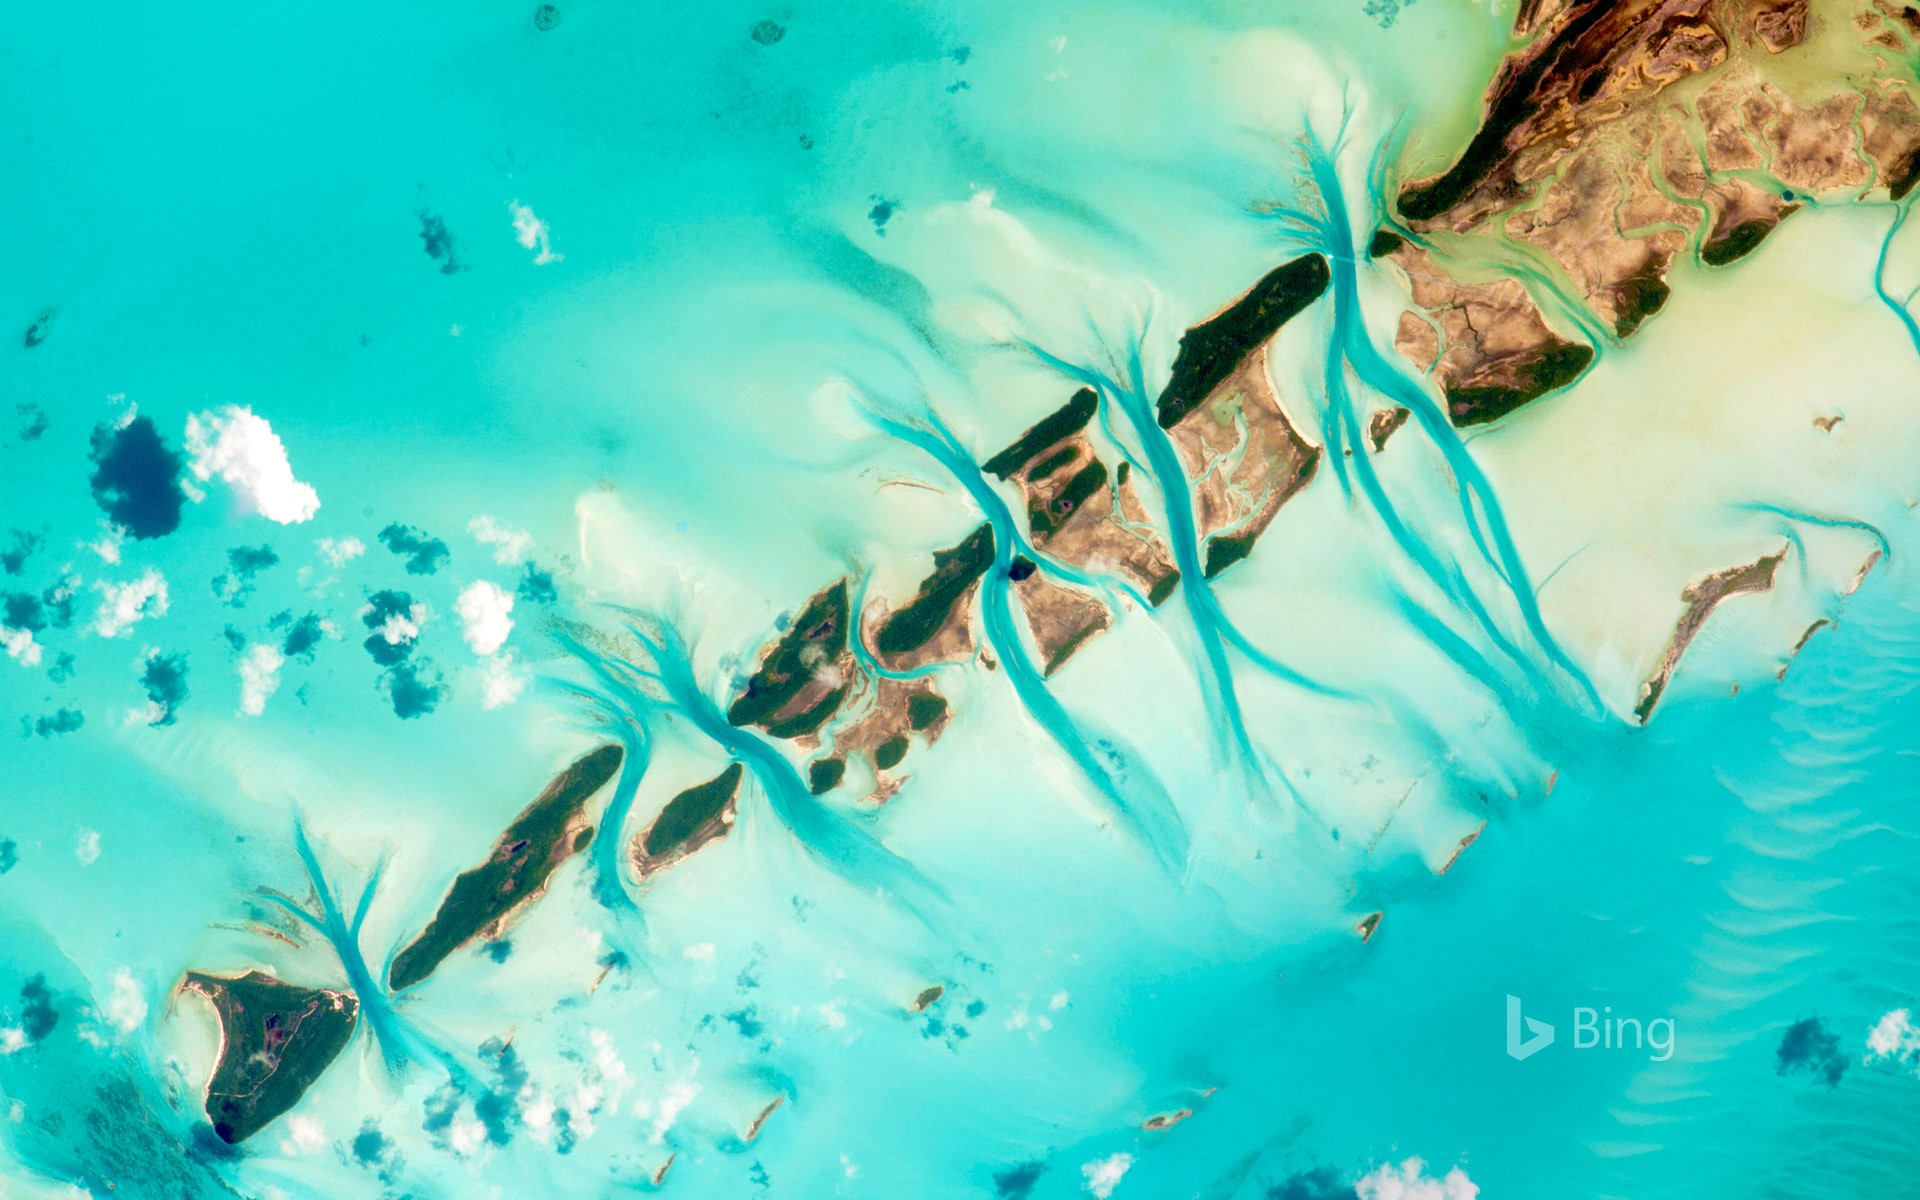 Small island cays west of Great Exuma in the Bahamas photographed from the International Space Station